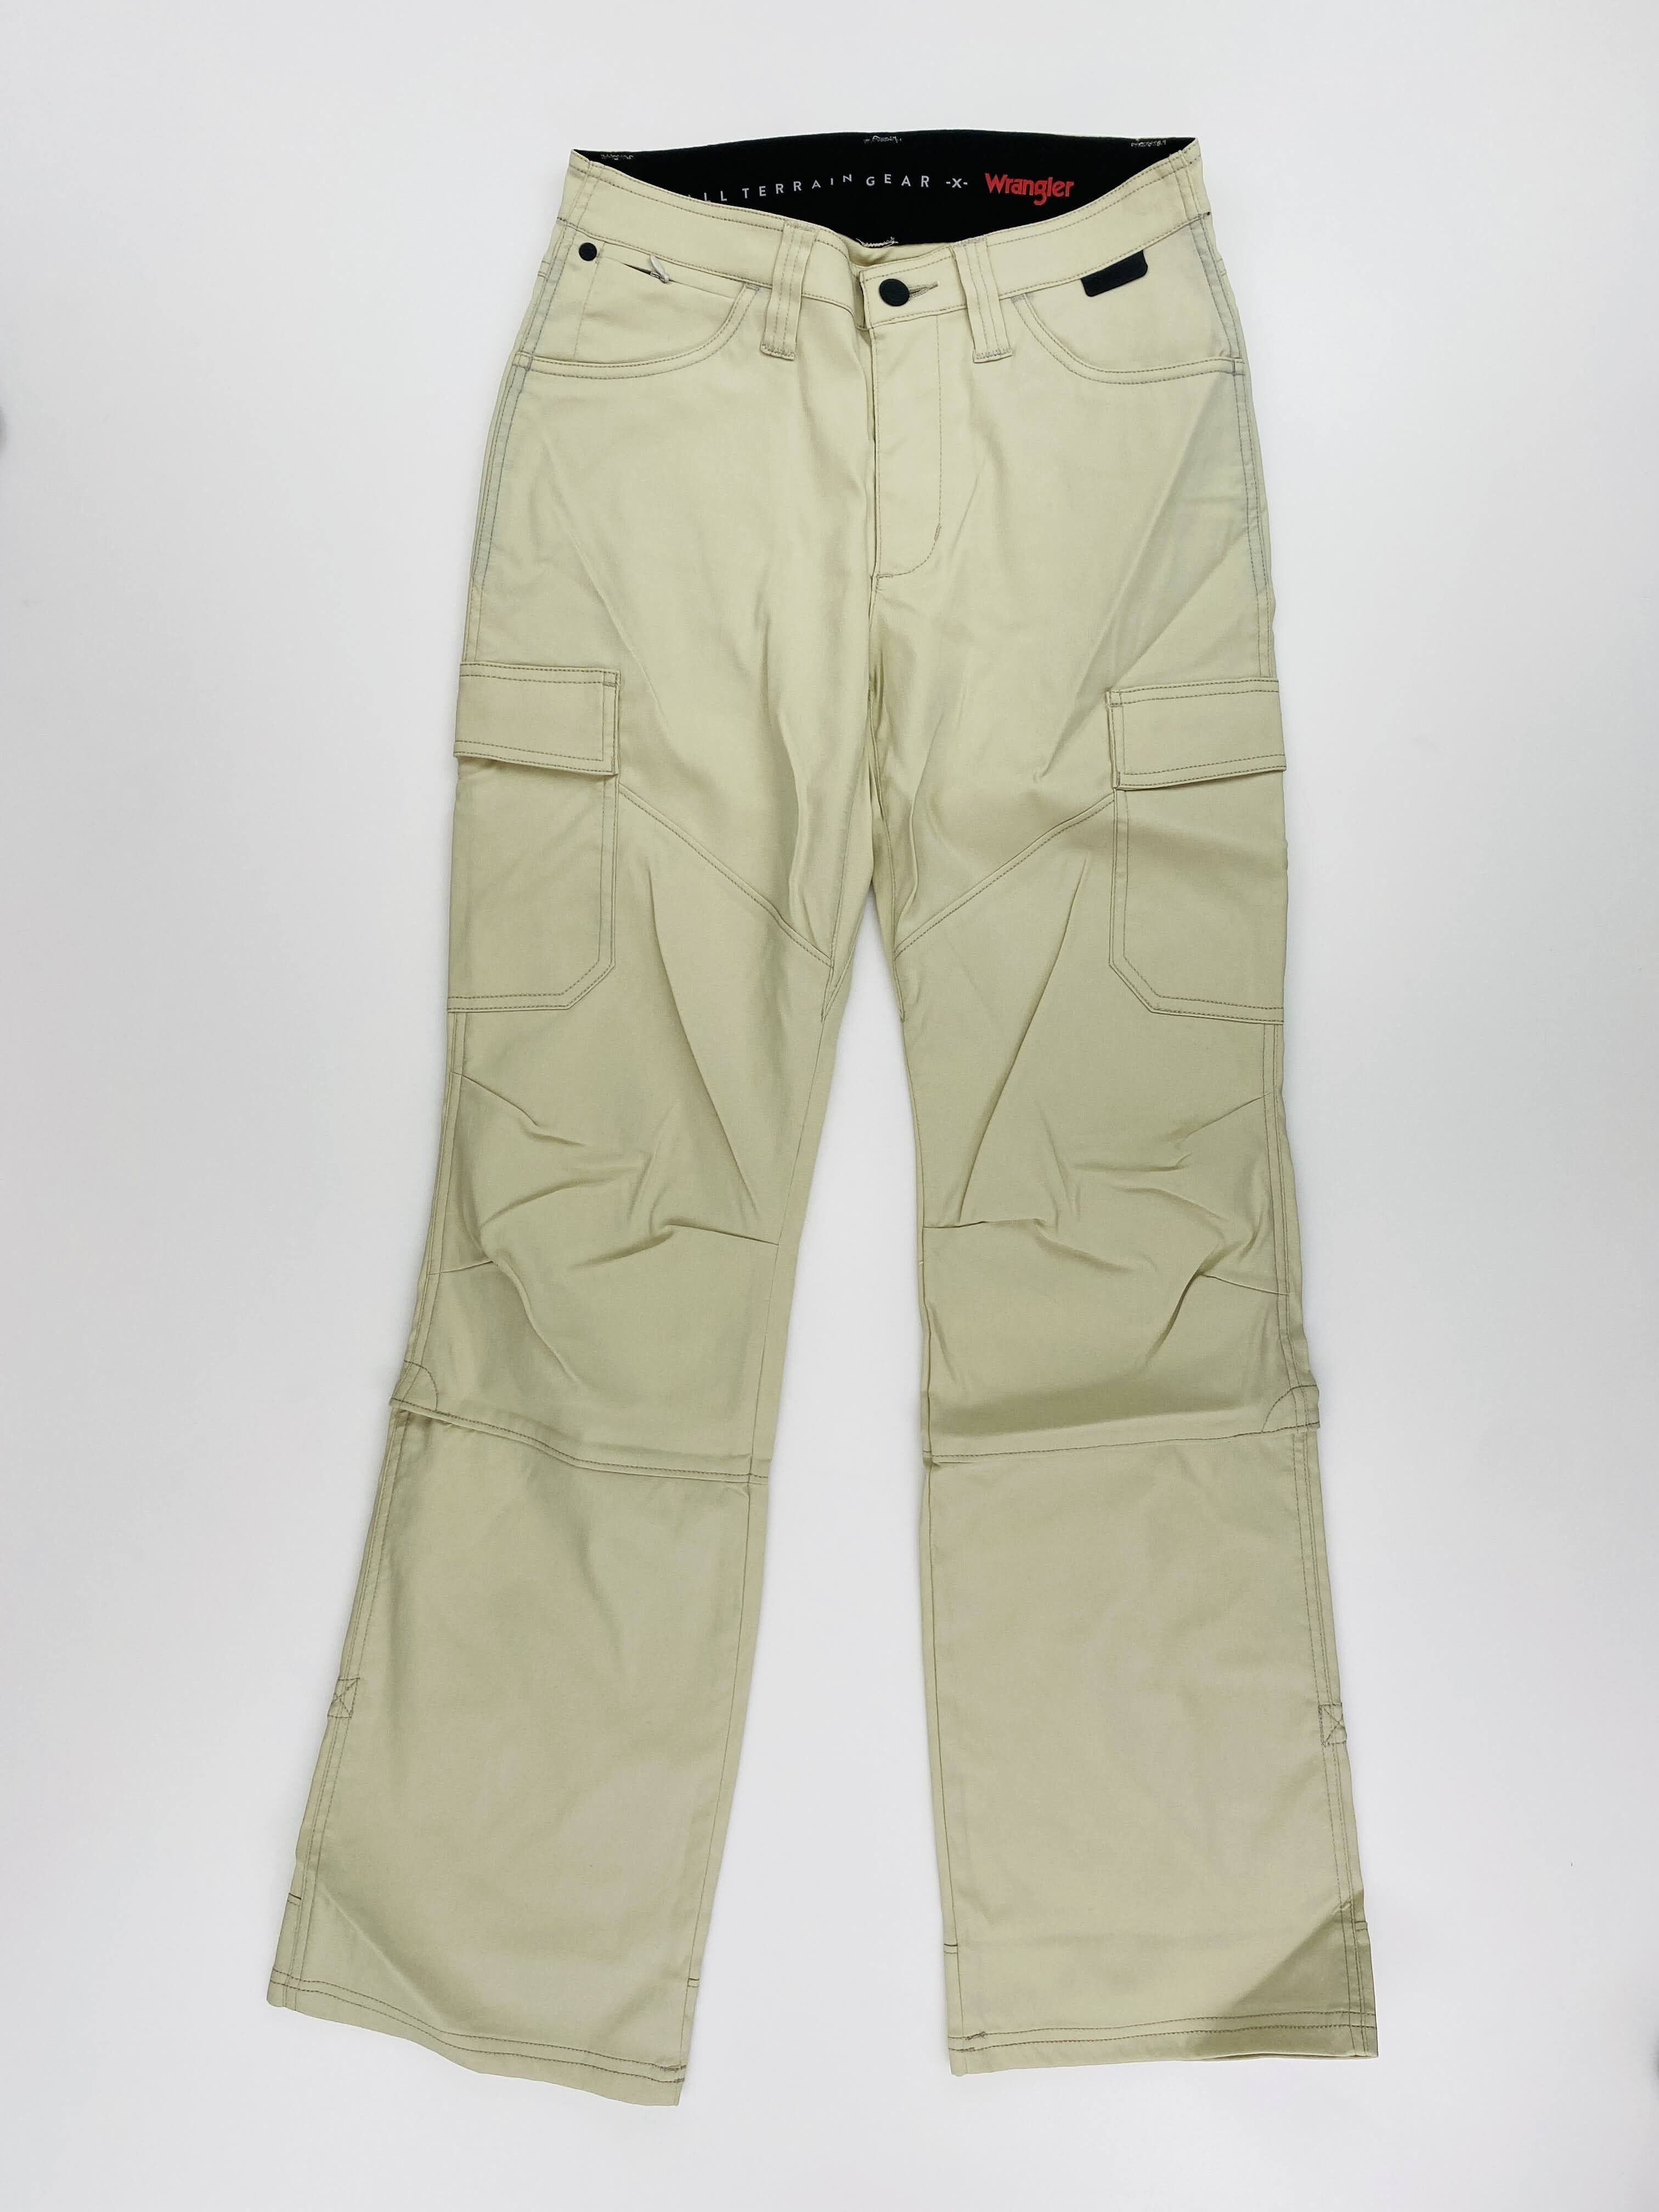 WOMEN LATEST CARGO TROUSERS BY SKG  SOLID HIGHRISE CARGO JEANS  6 POCKET  WIDE